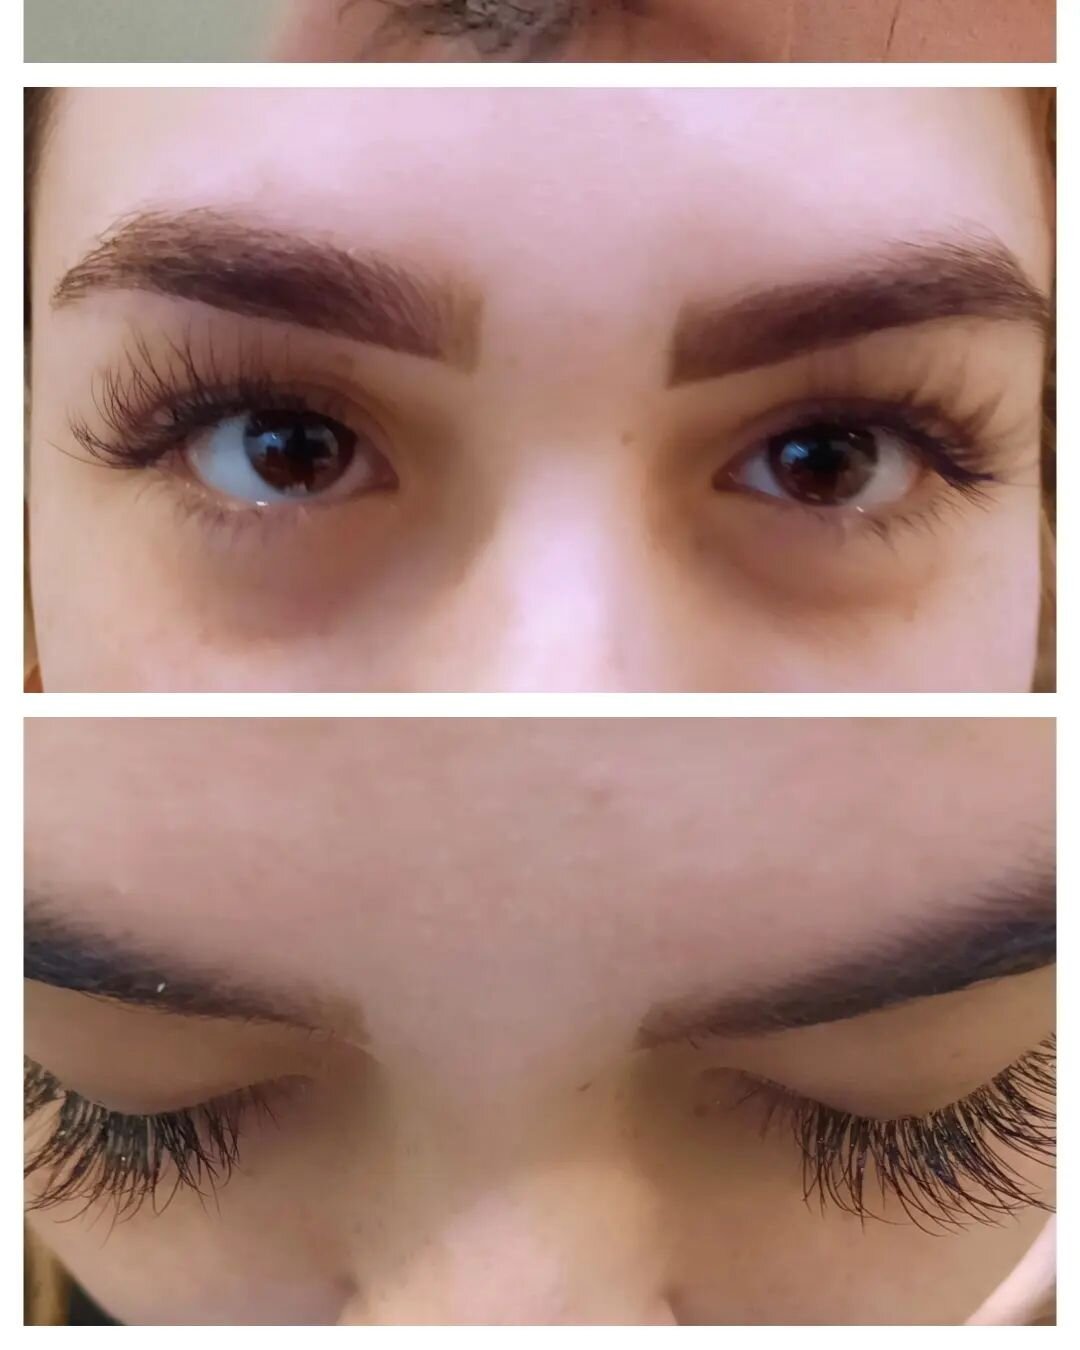 Wispy Lite Lash Extensions. These are fewer then pur classic set. There is a lash every 4th lash so it adds length and thickness but not too much. Call to make your appt for the holidays with Khalian 256-200-1983 or go online www.agavebodywellness.co